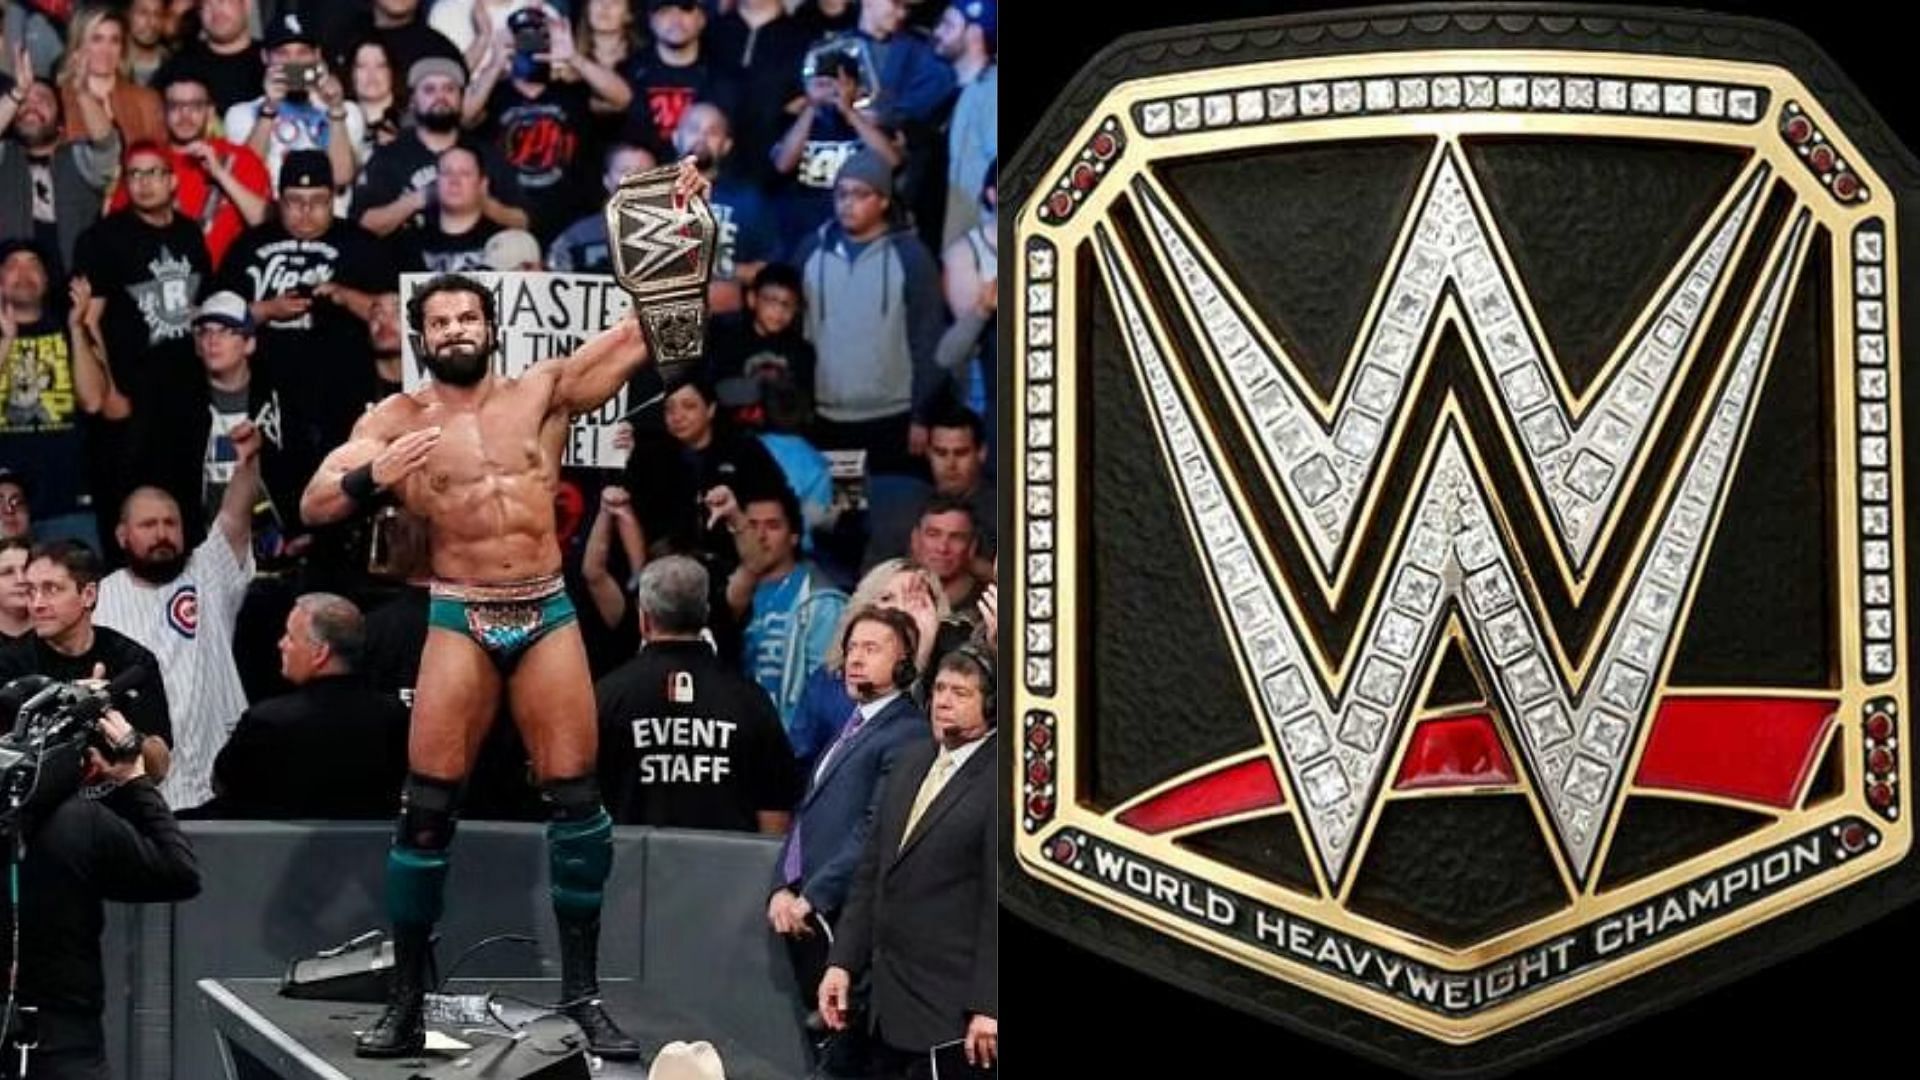 A former WWE Champion is getting another title shot.